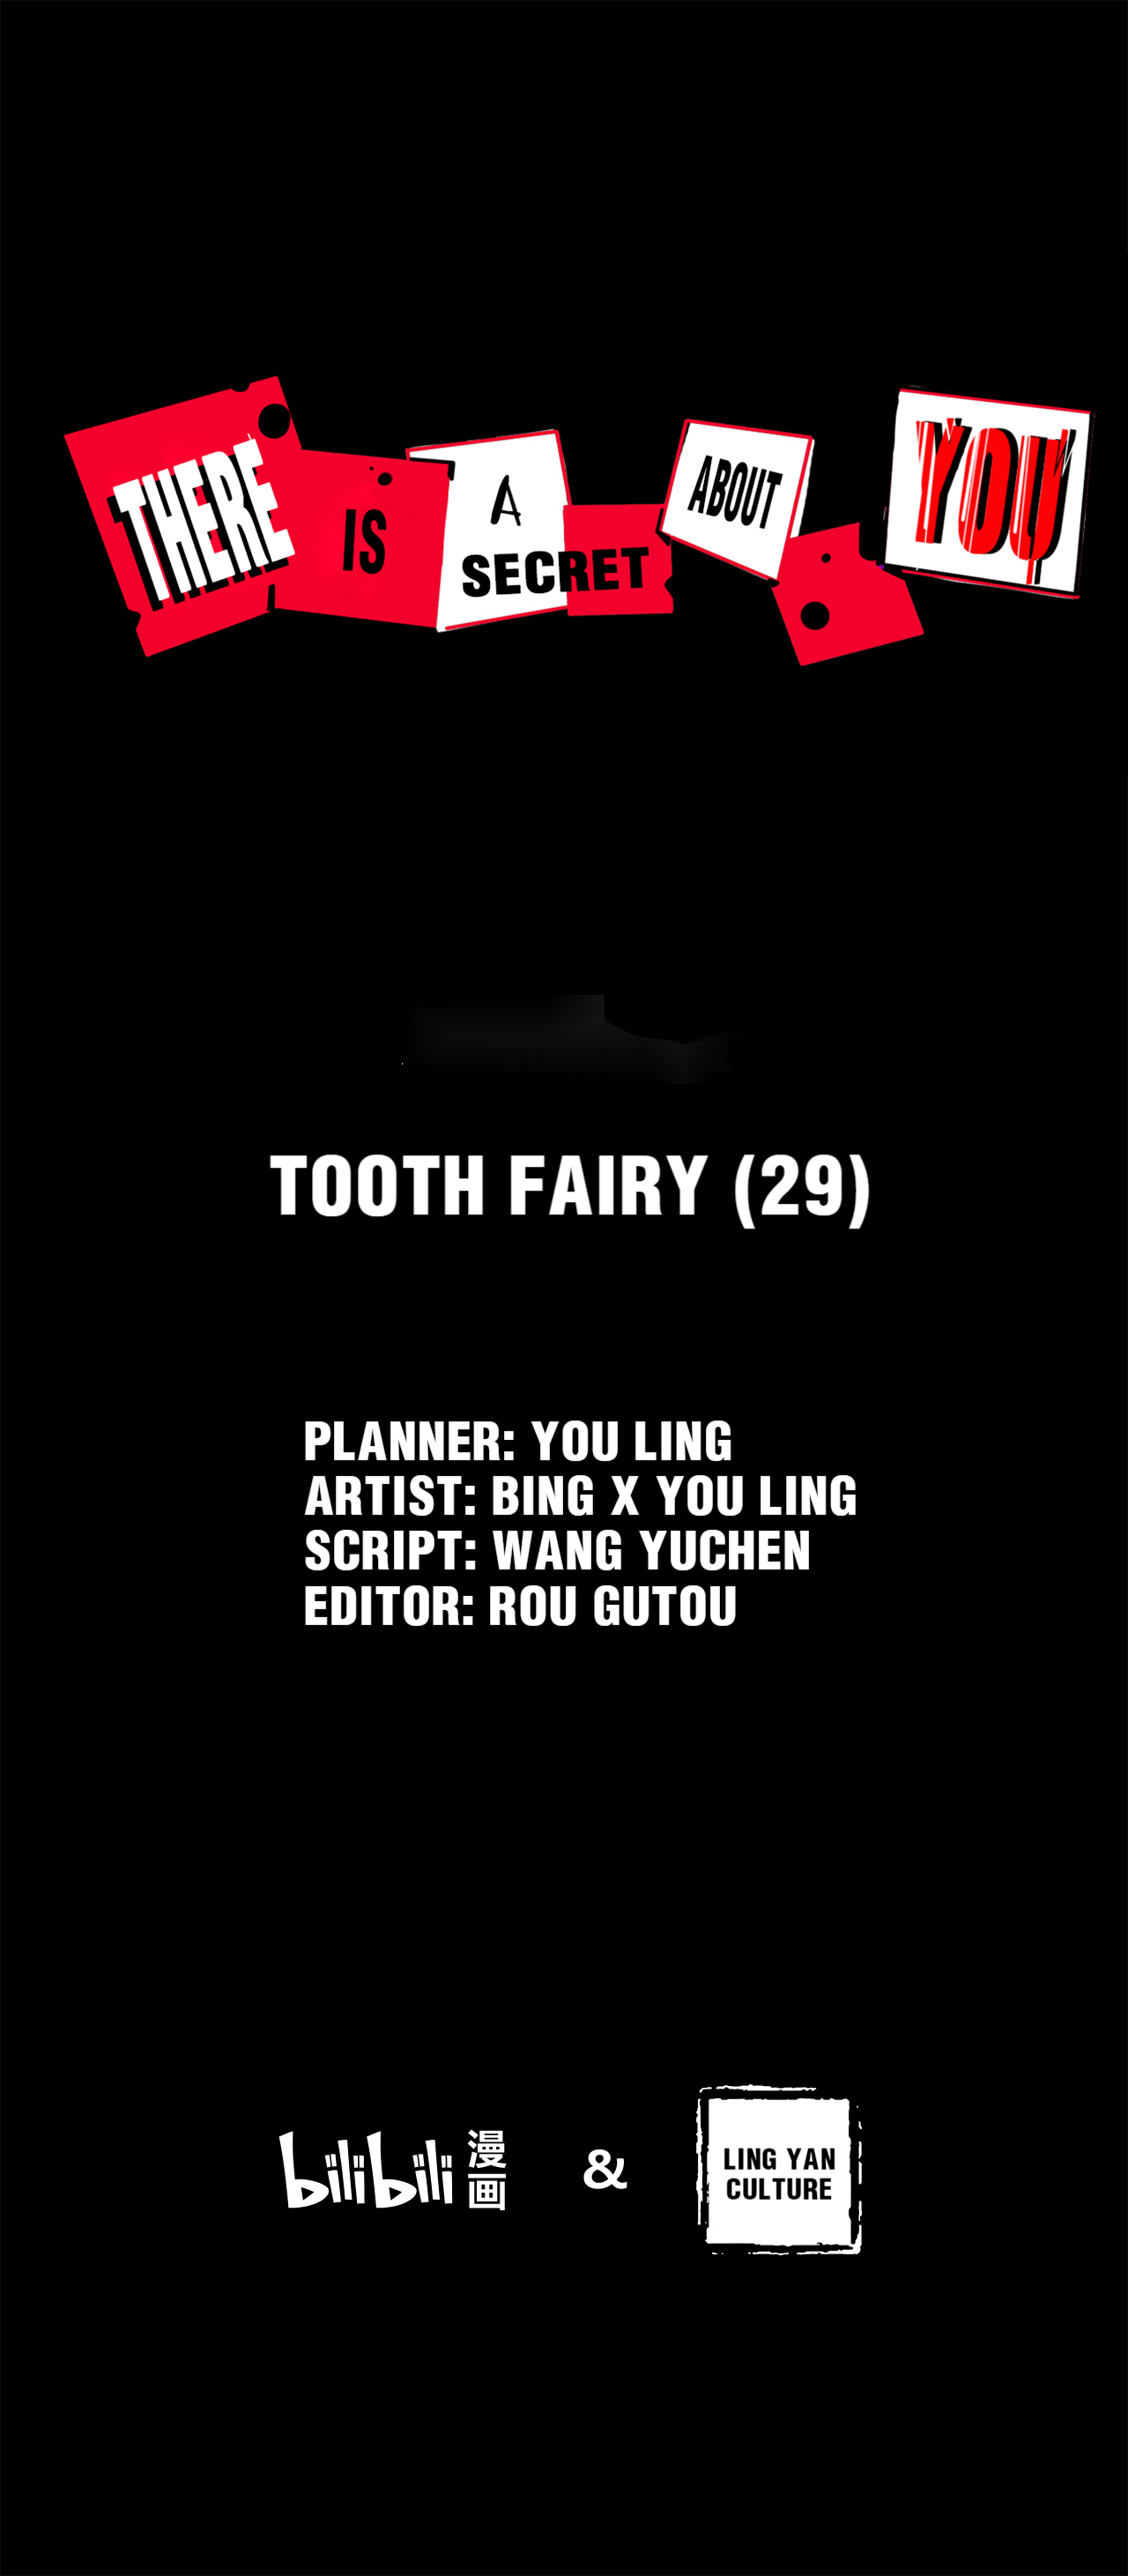 There is a Secret About You 29 Tooth Fairy (29)